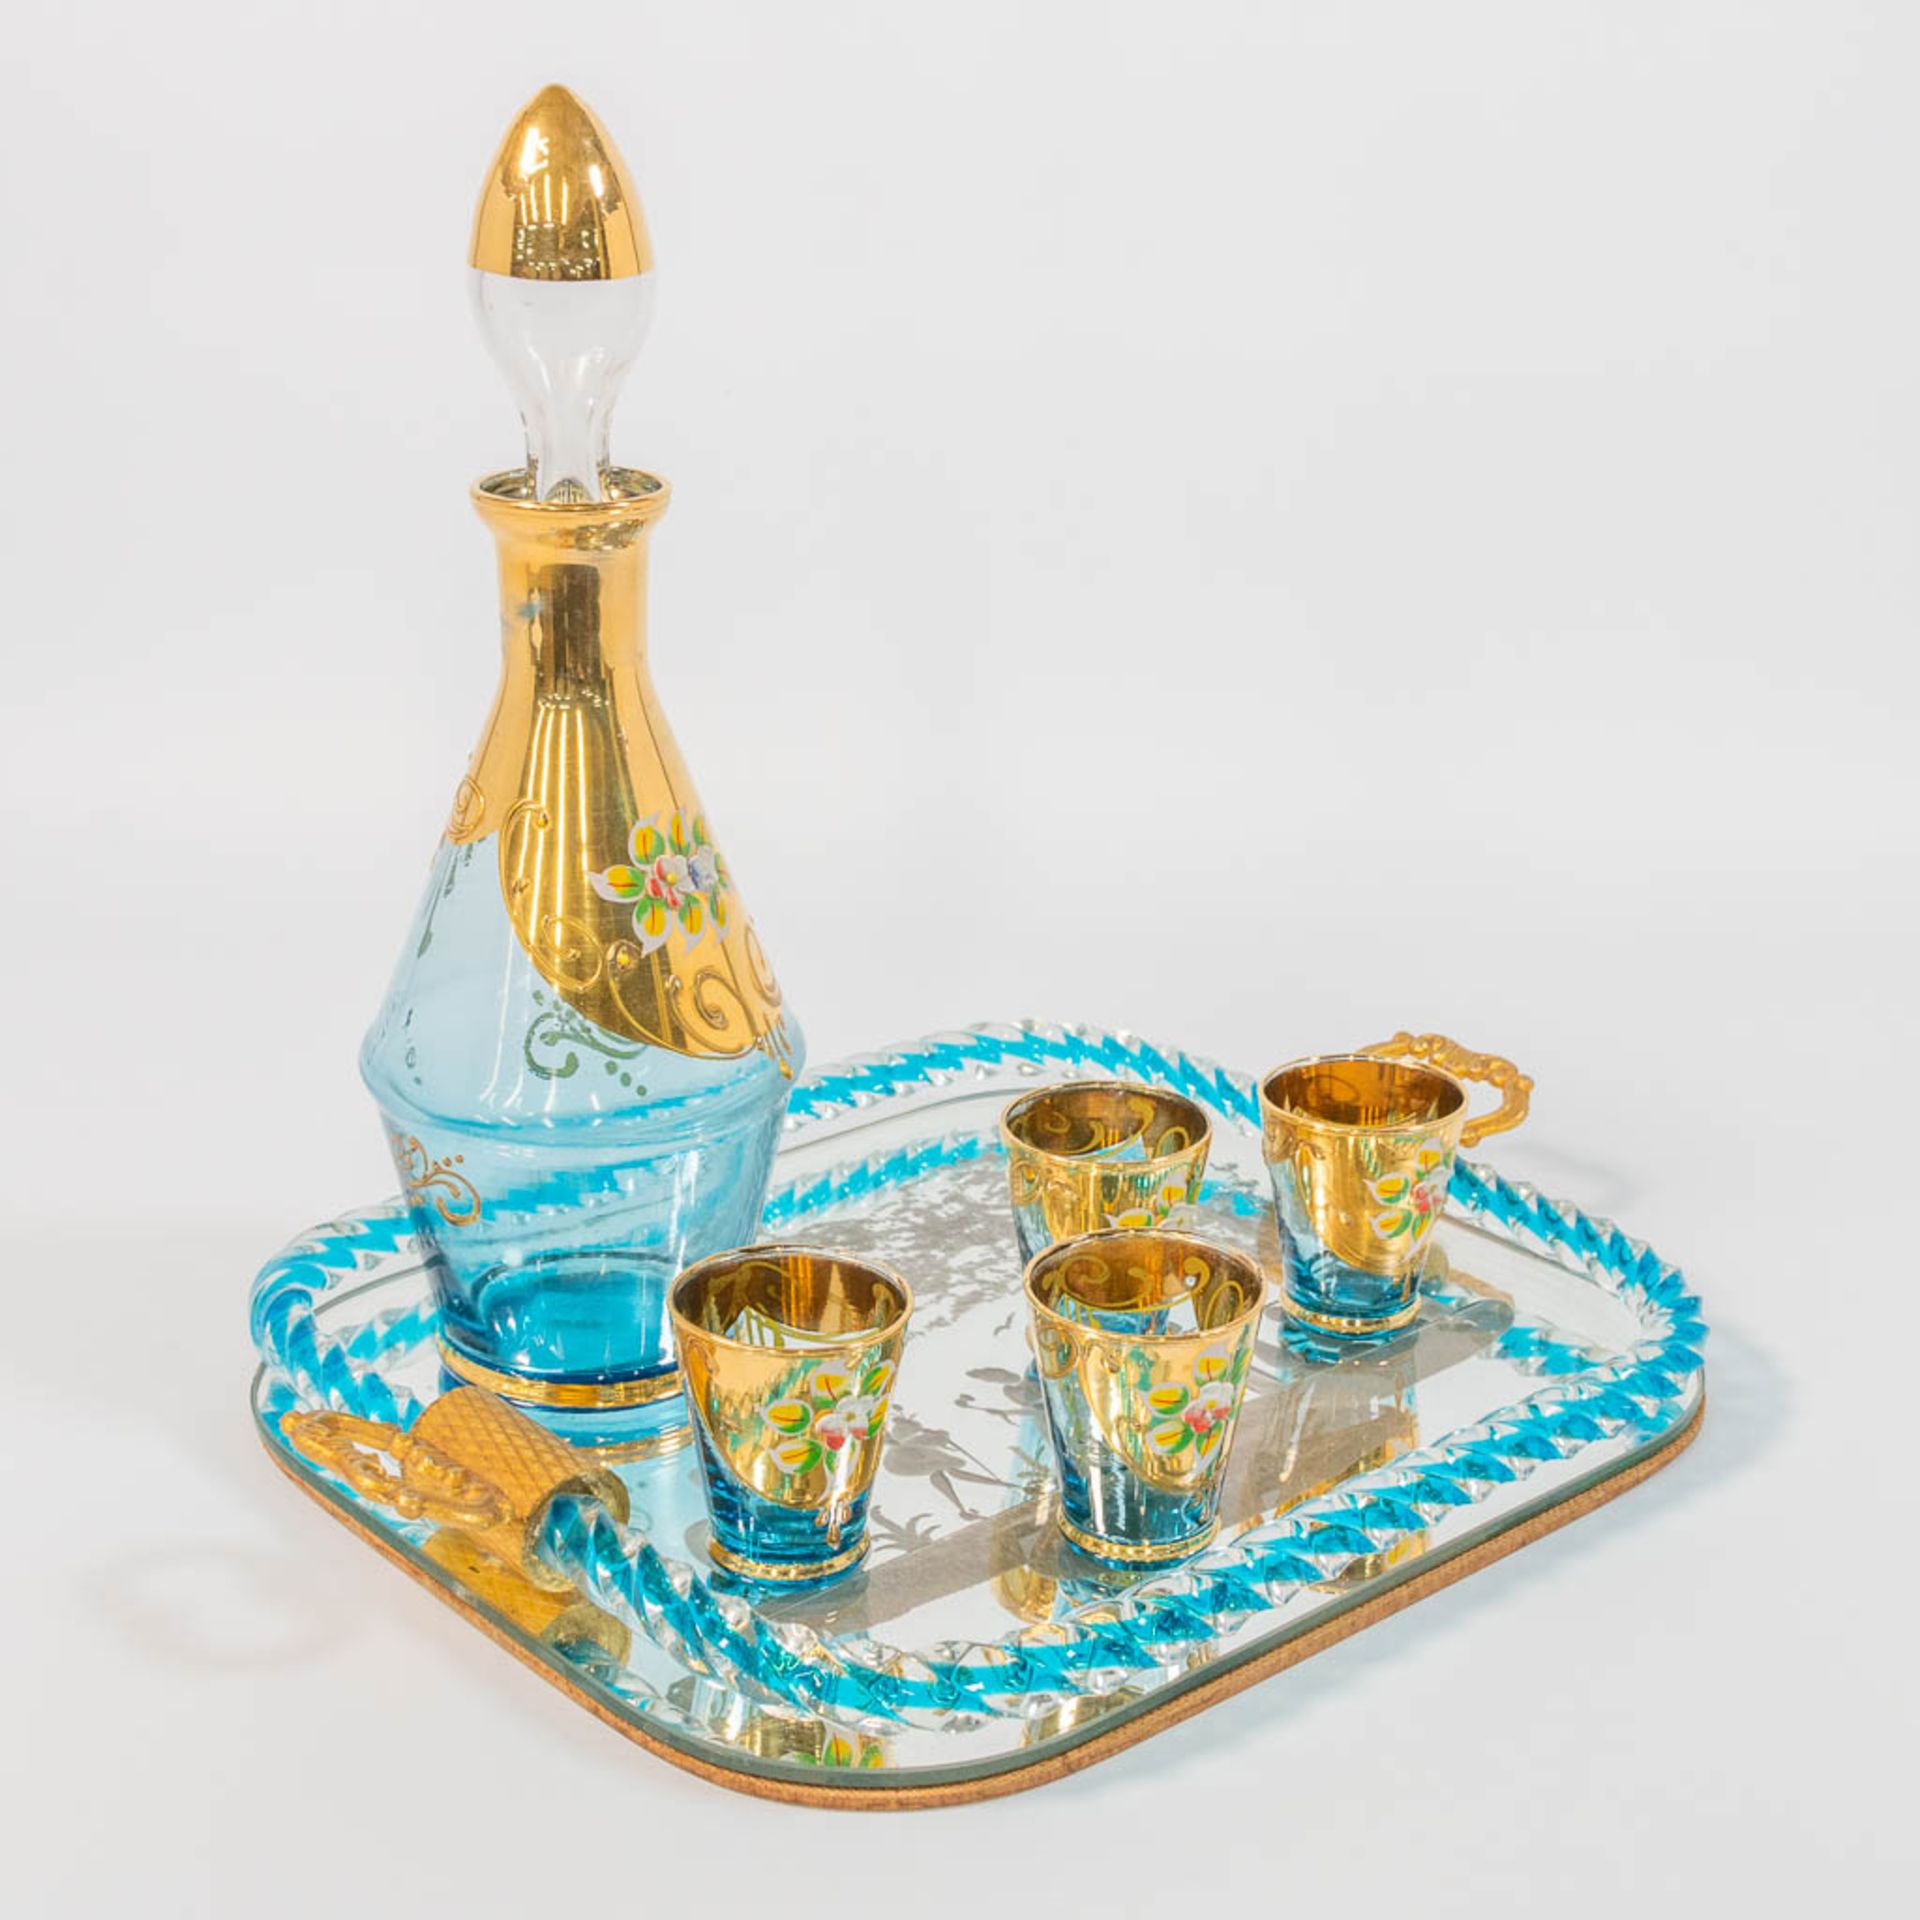 A decanter, glasses, and tray with gold painted flowers and etched decor. - Image 8 of 20